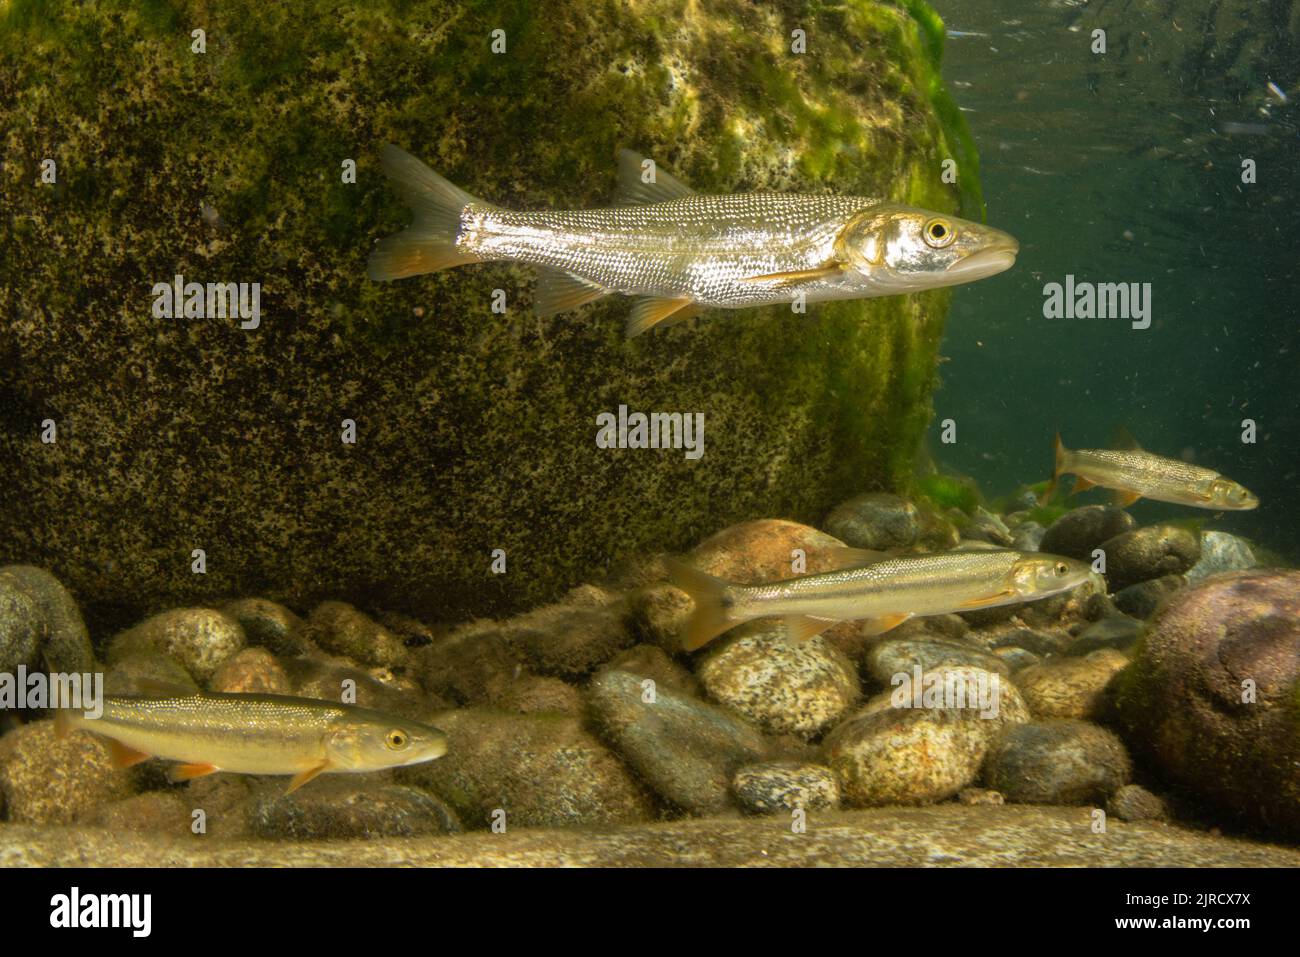 Sacramento pikeminnow (Ptychocheilus grandis) underwater in a clean freshwater river in the Sierra Nevada mountains of California, USA. Stock Photo